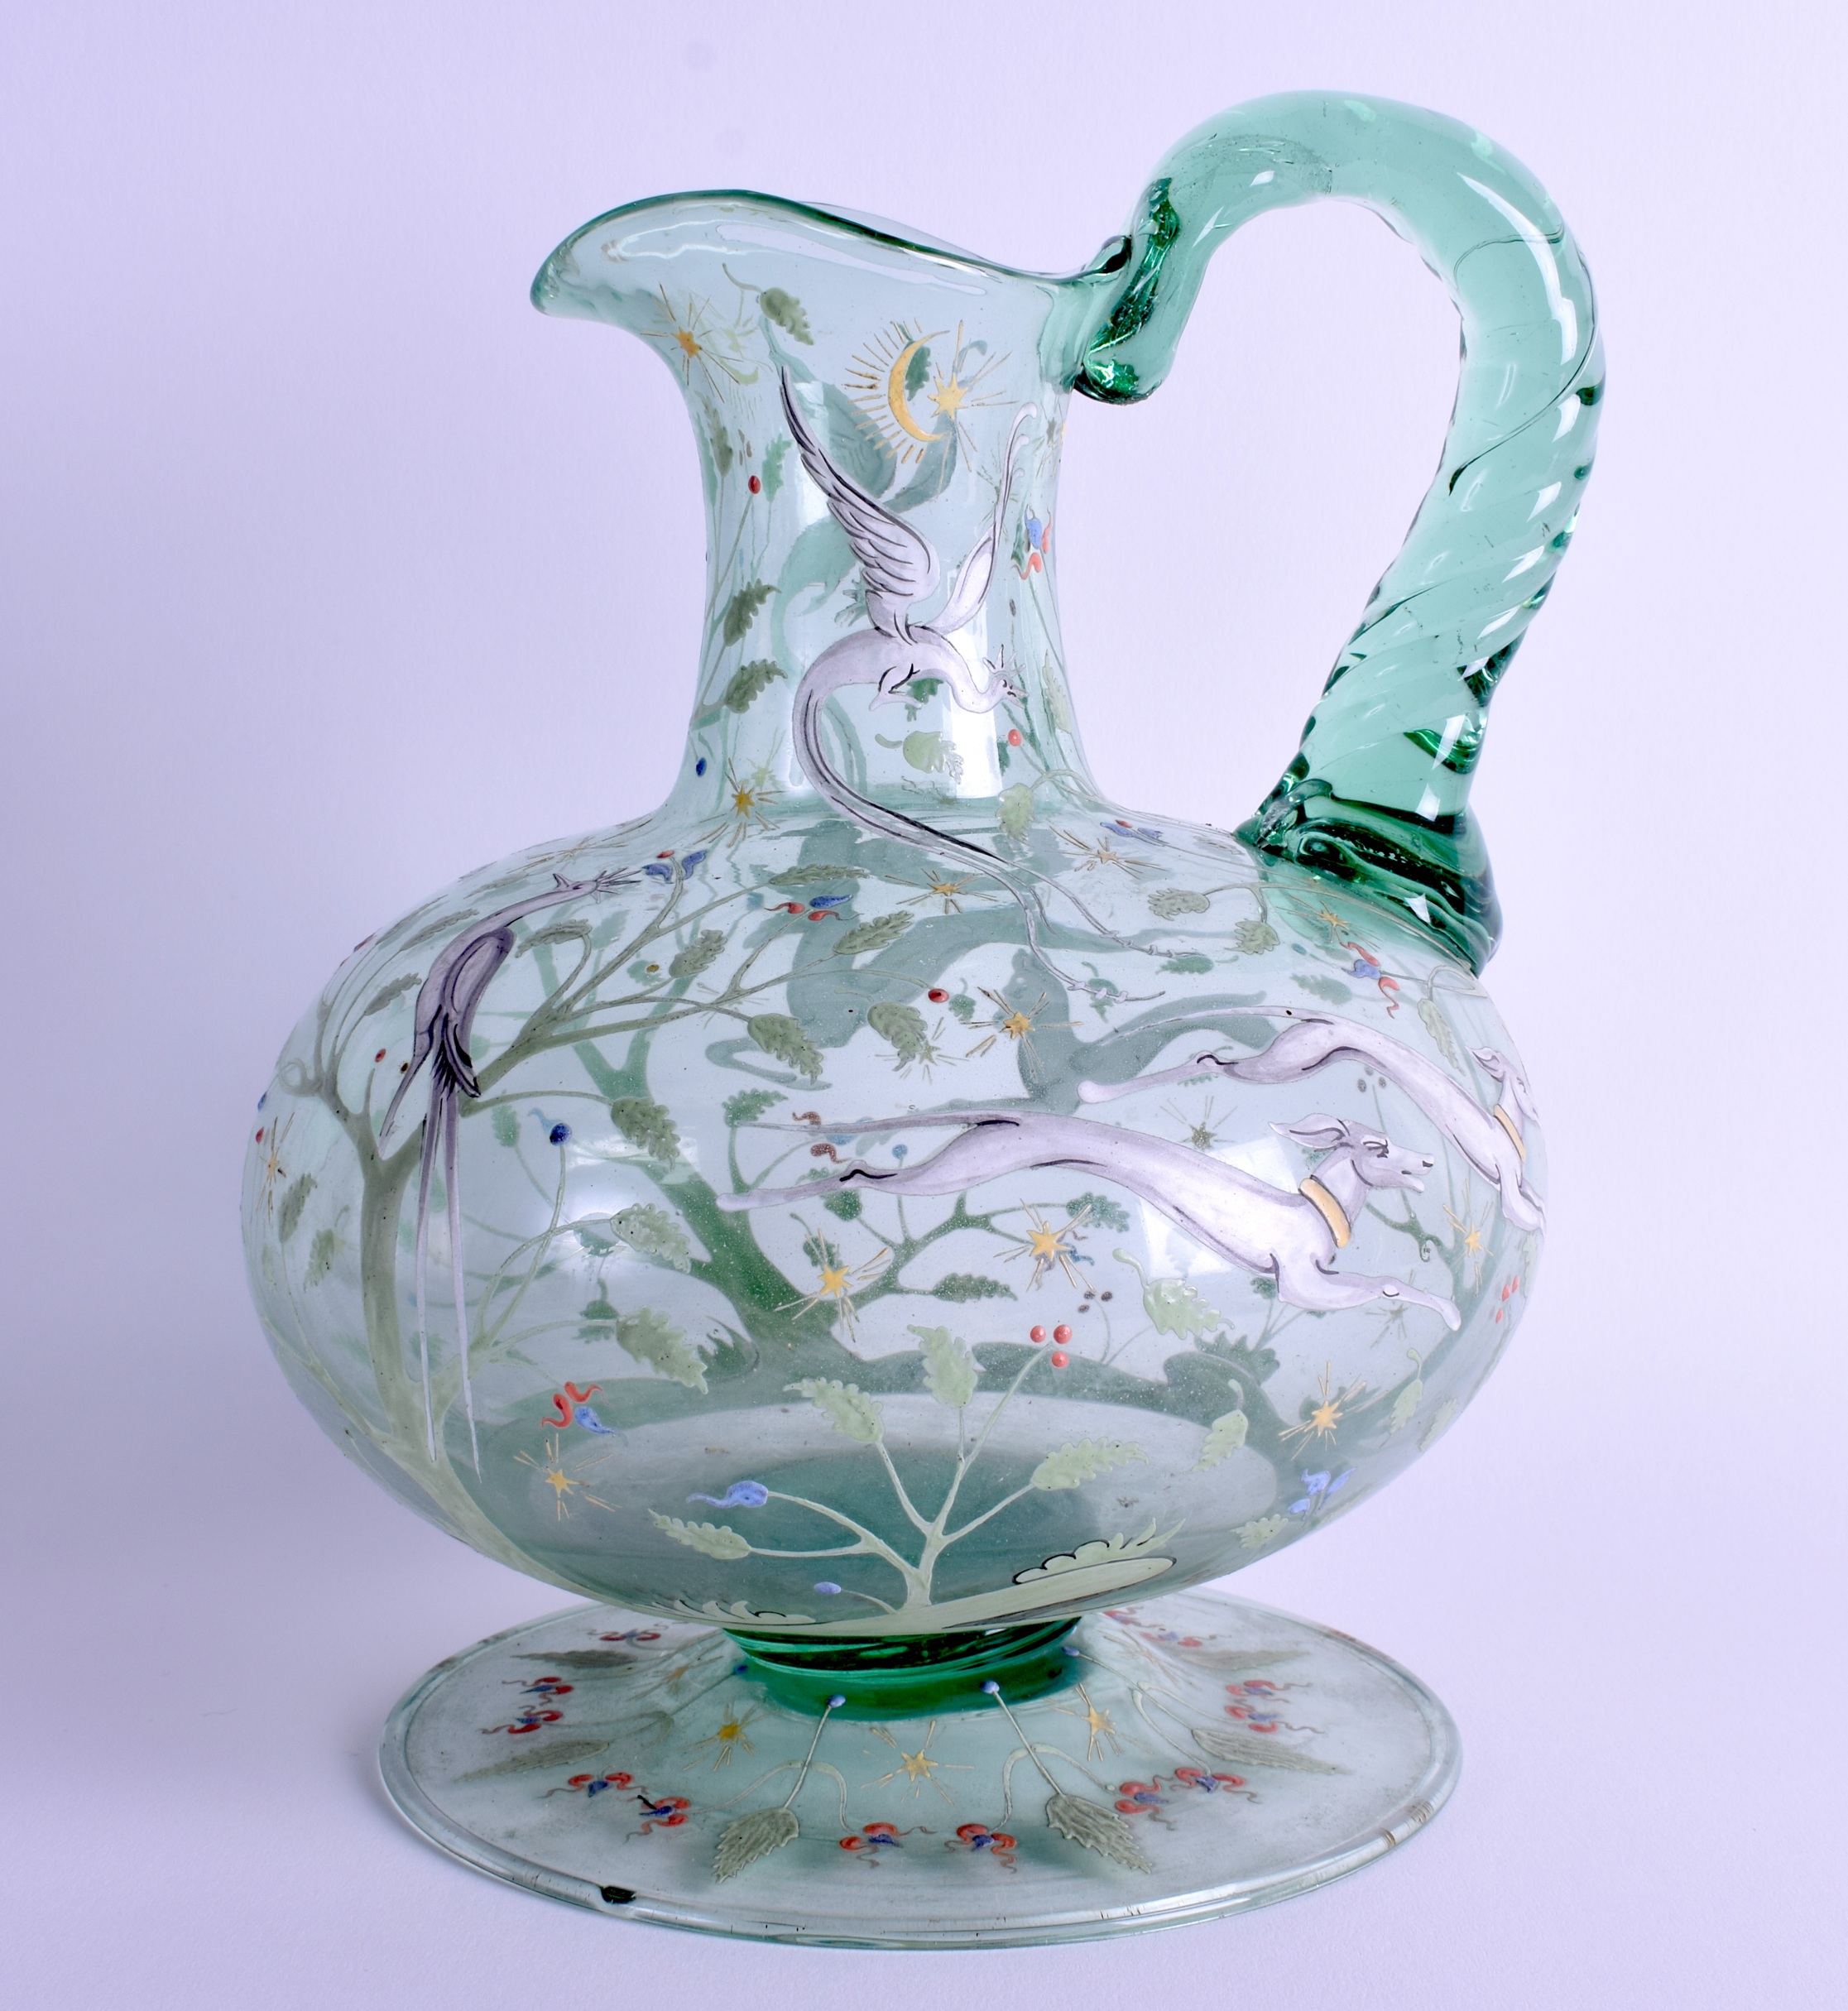 AN ART NOUVEAU GERMAN ENAMELLED GLASS PITCHER C1890 Attributed to Fritz Heckert, enamelled in the Is